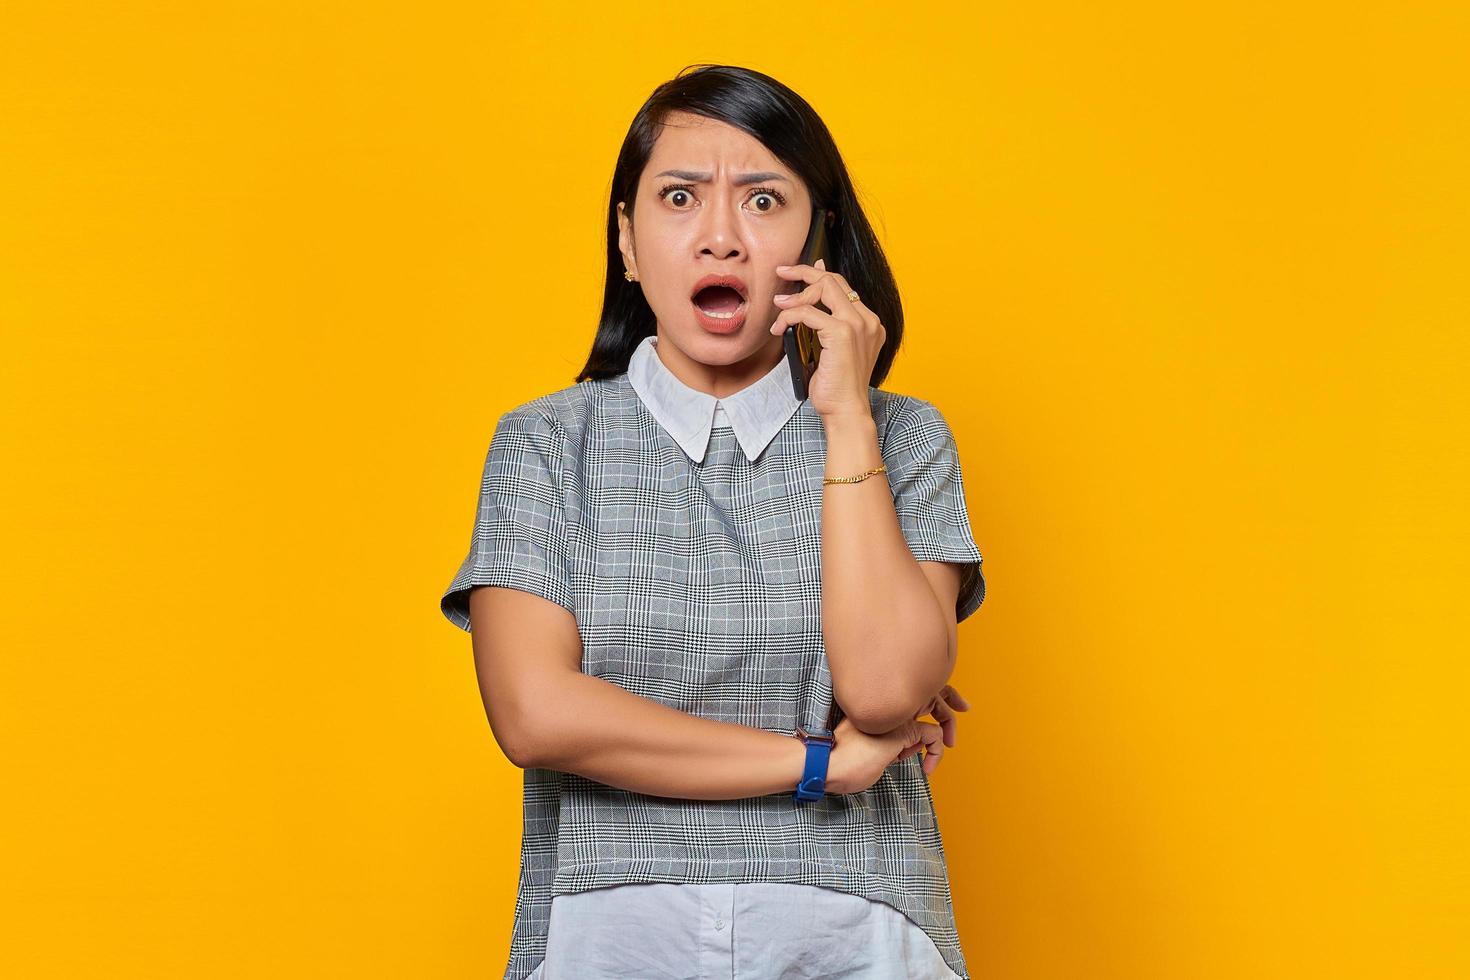 Portrait of shocked young Asian woman while receiving incoming call on smartphone on yellow background photo